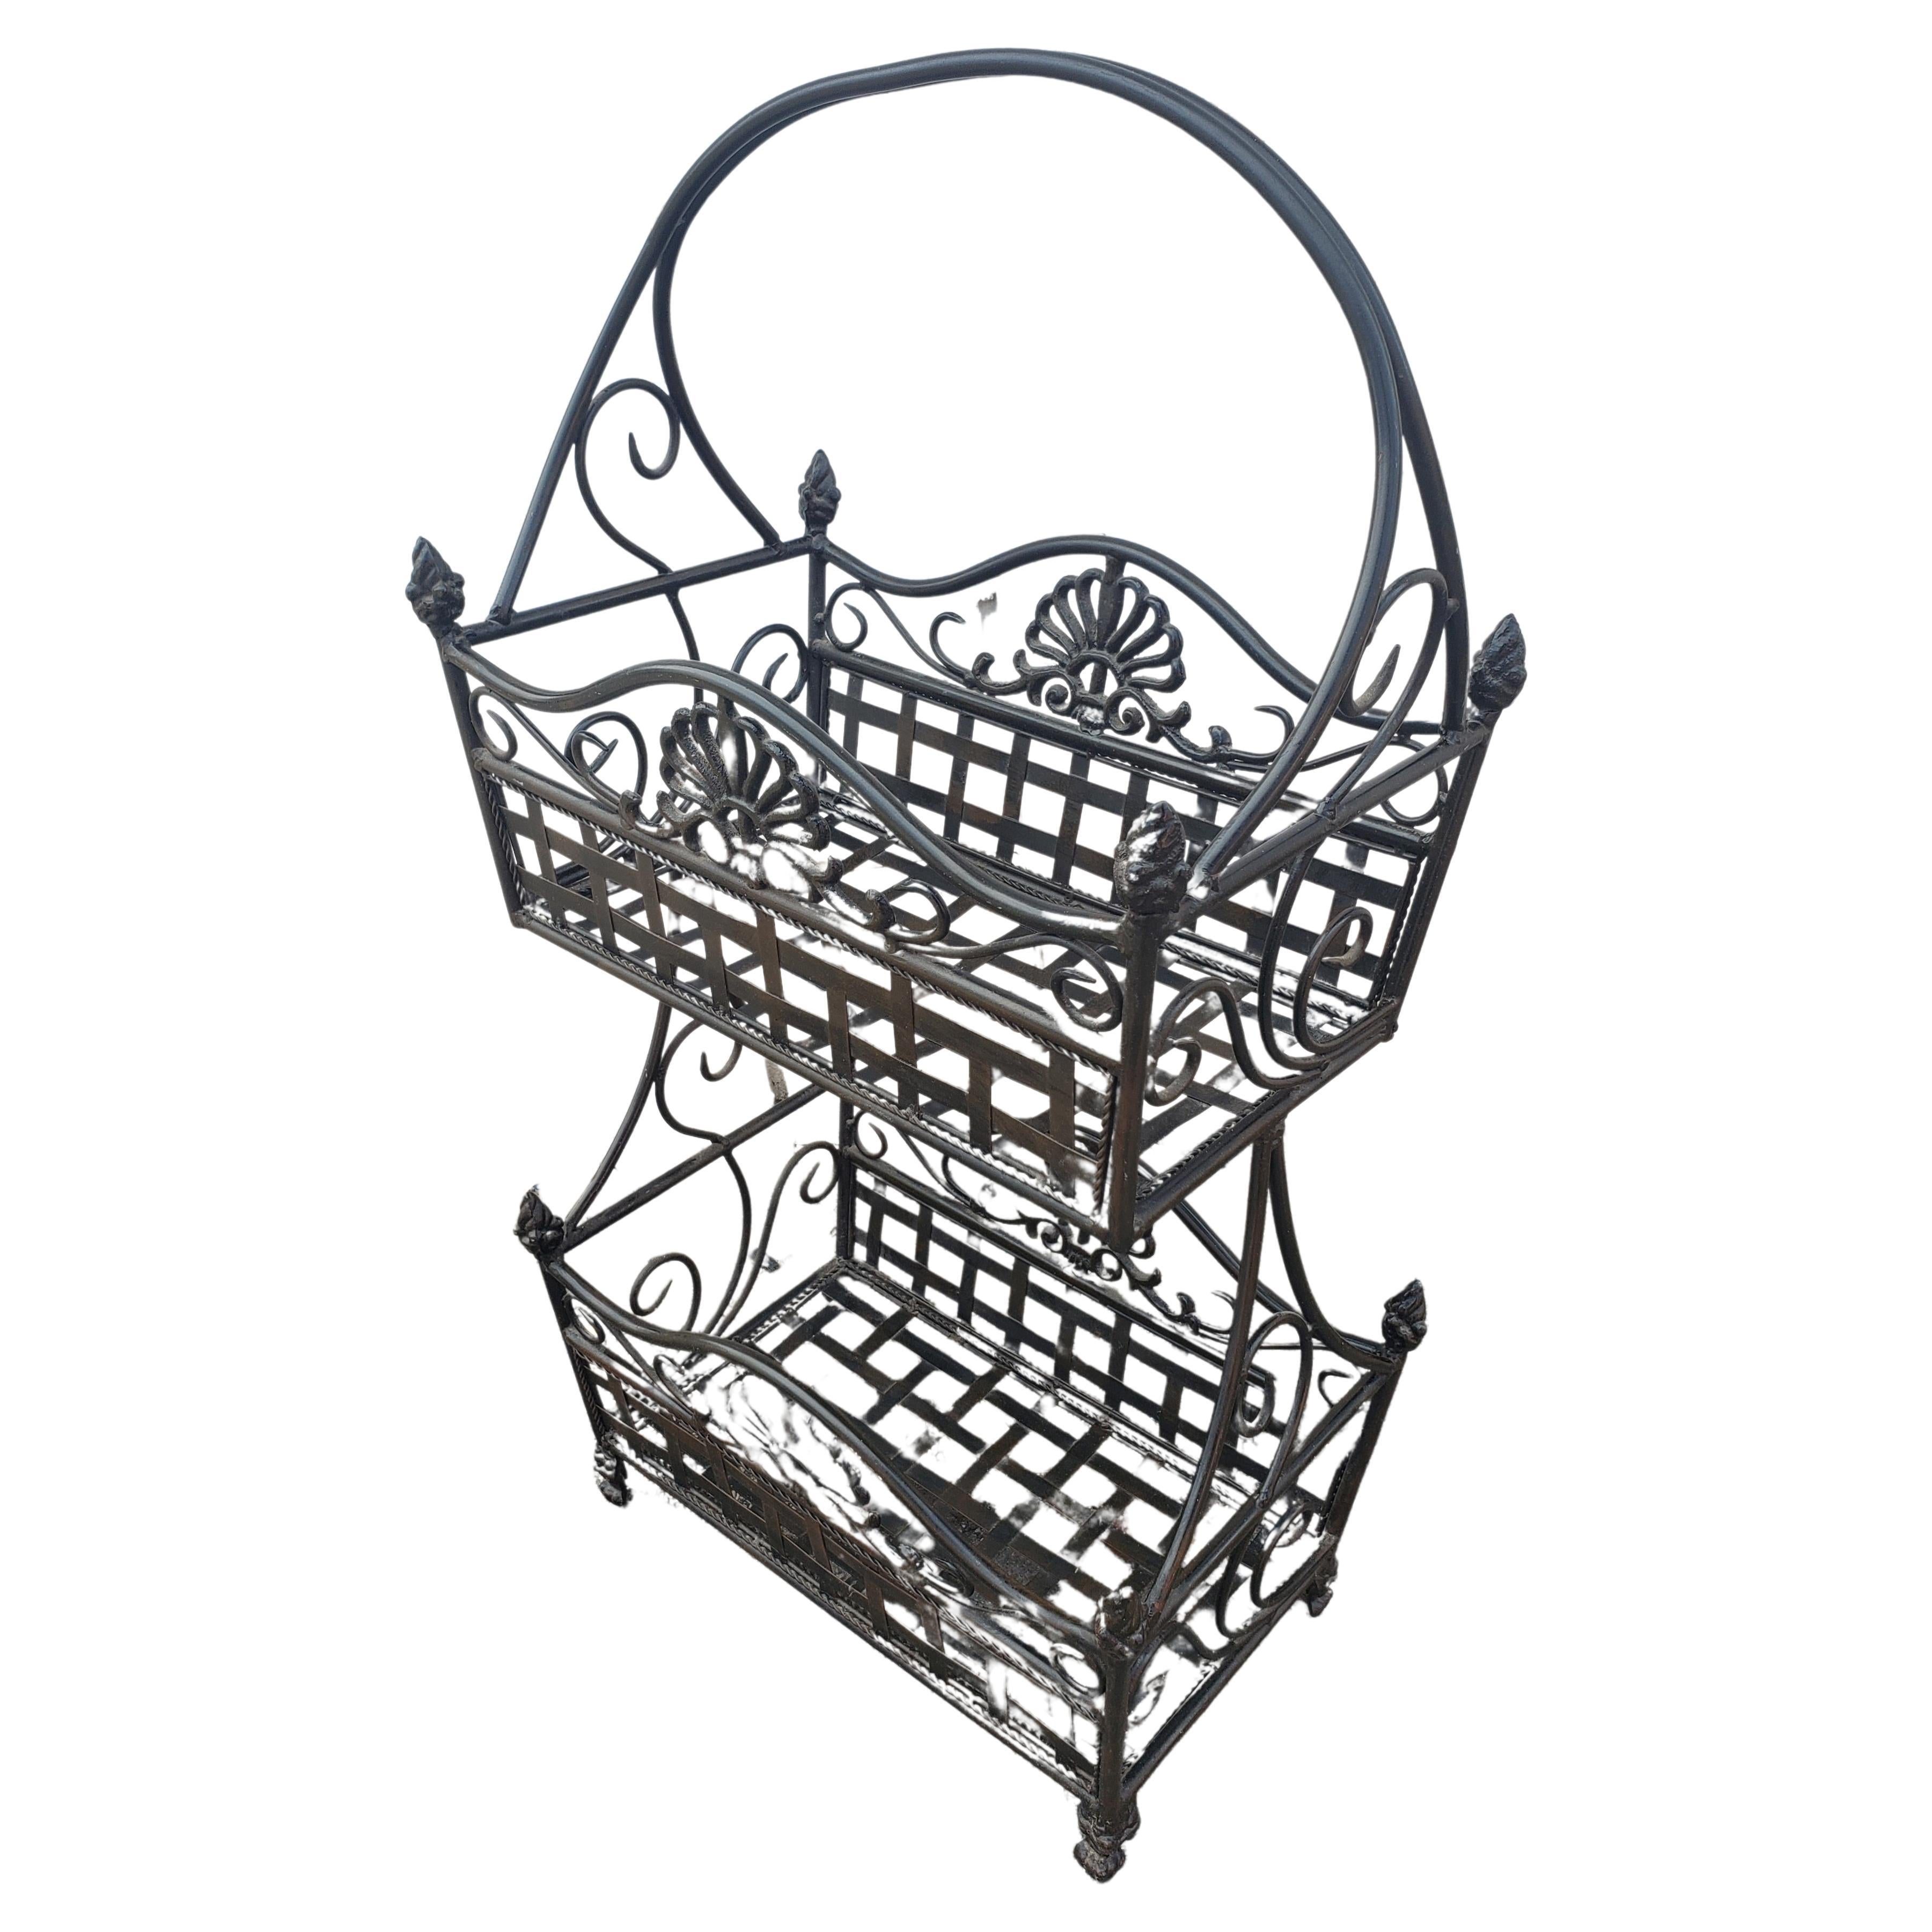 Antique two tier wrought iron 2 tier standing basket in excellent condition. 
Solid Iron with great stability. For Indoor and outdoor use. 
Measures 16.5